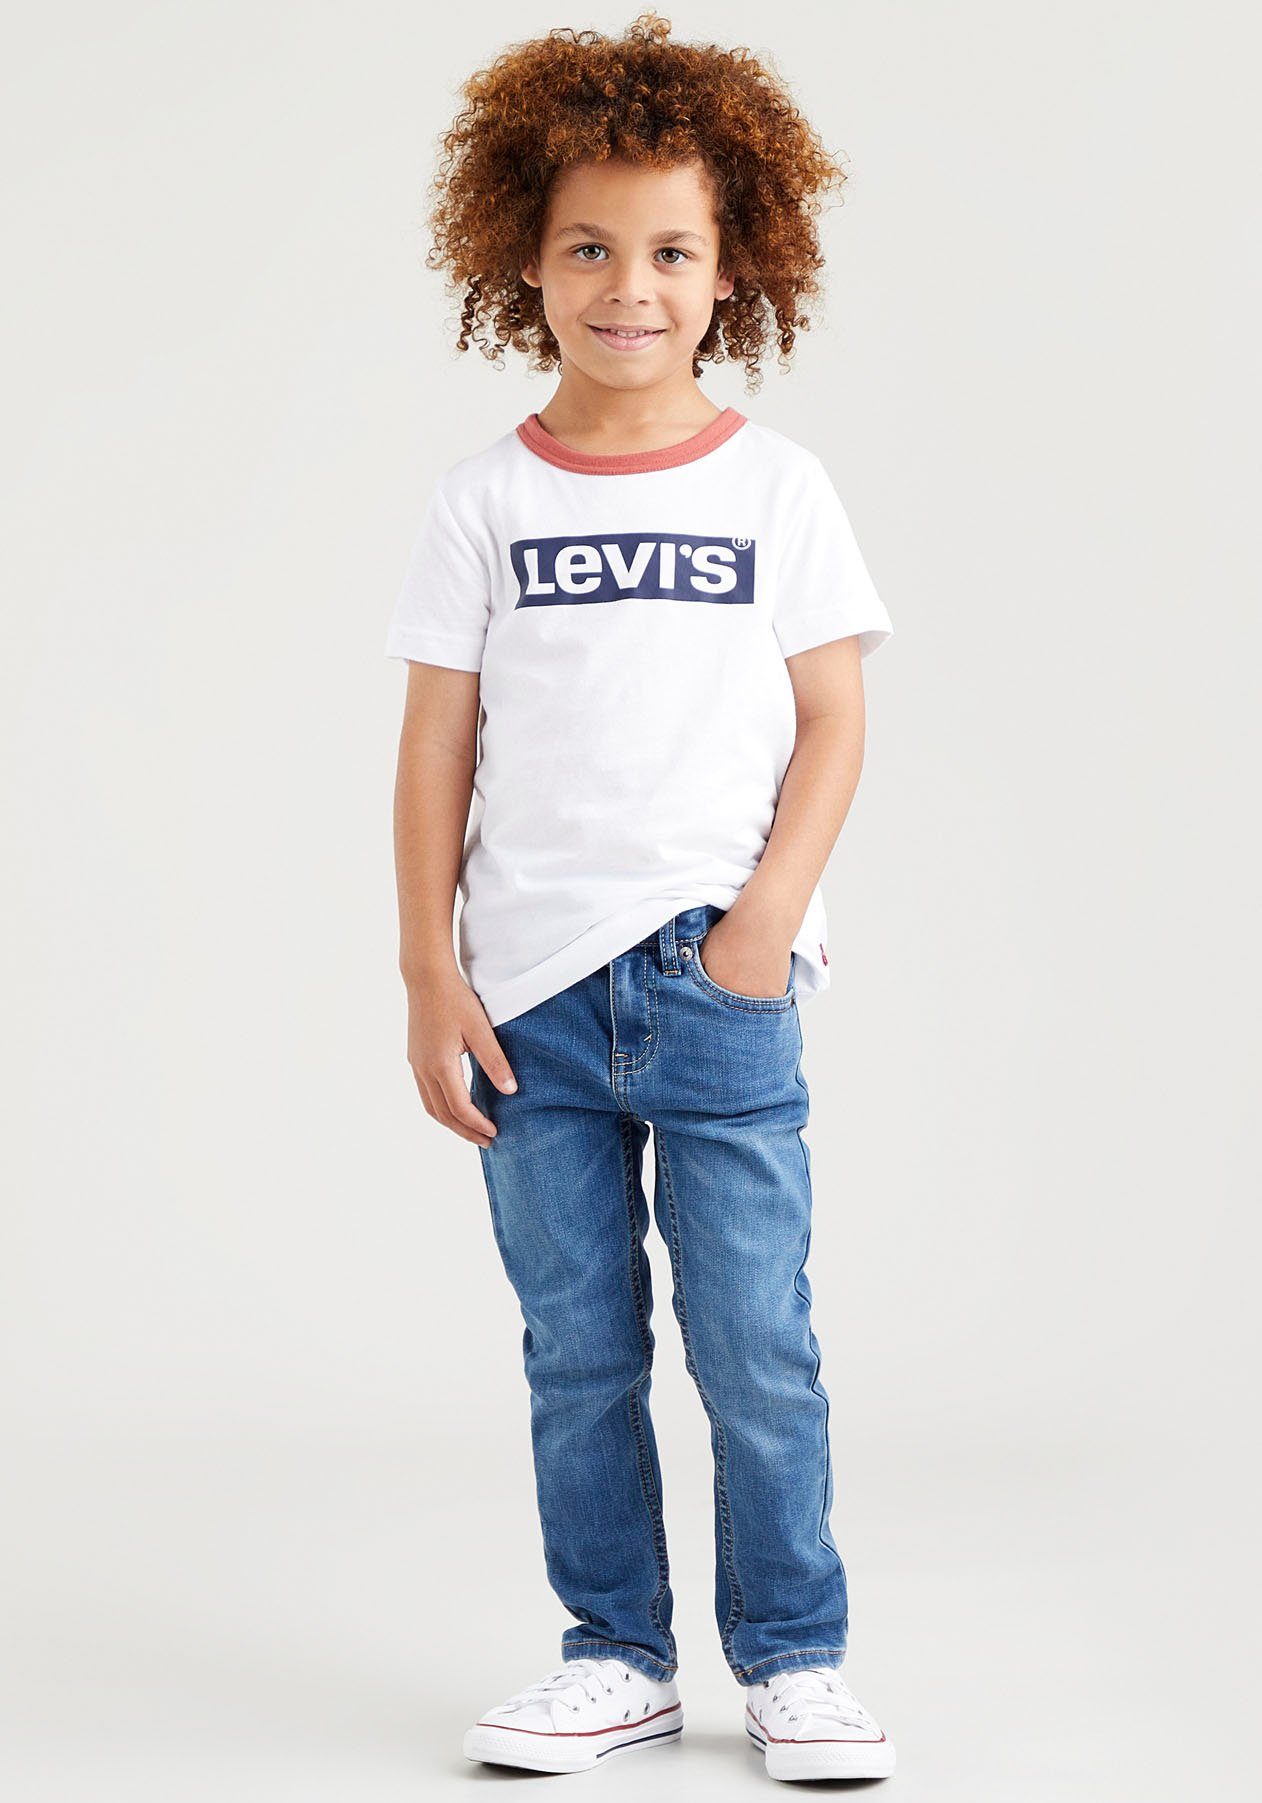 BOYS JEANS FIT used 510 Kids SKINNY indigo mid Levi's® for Skinny-fit-Jeans